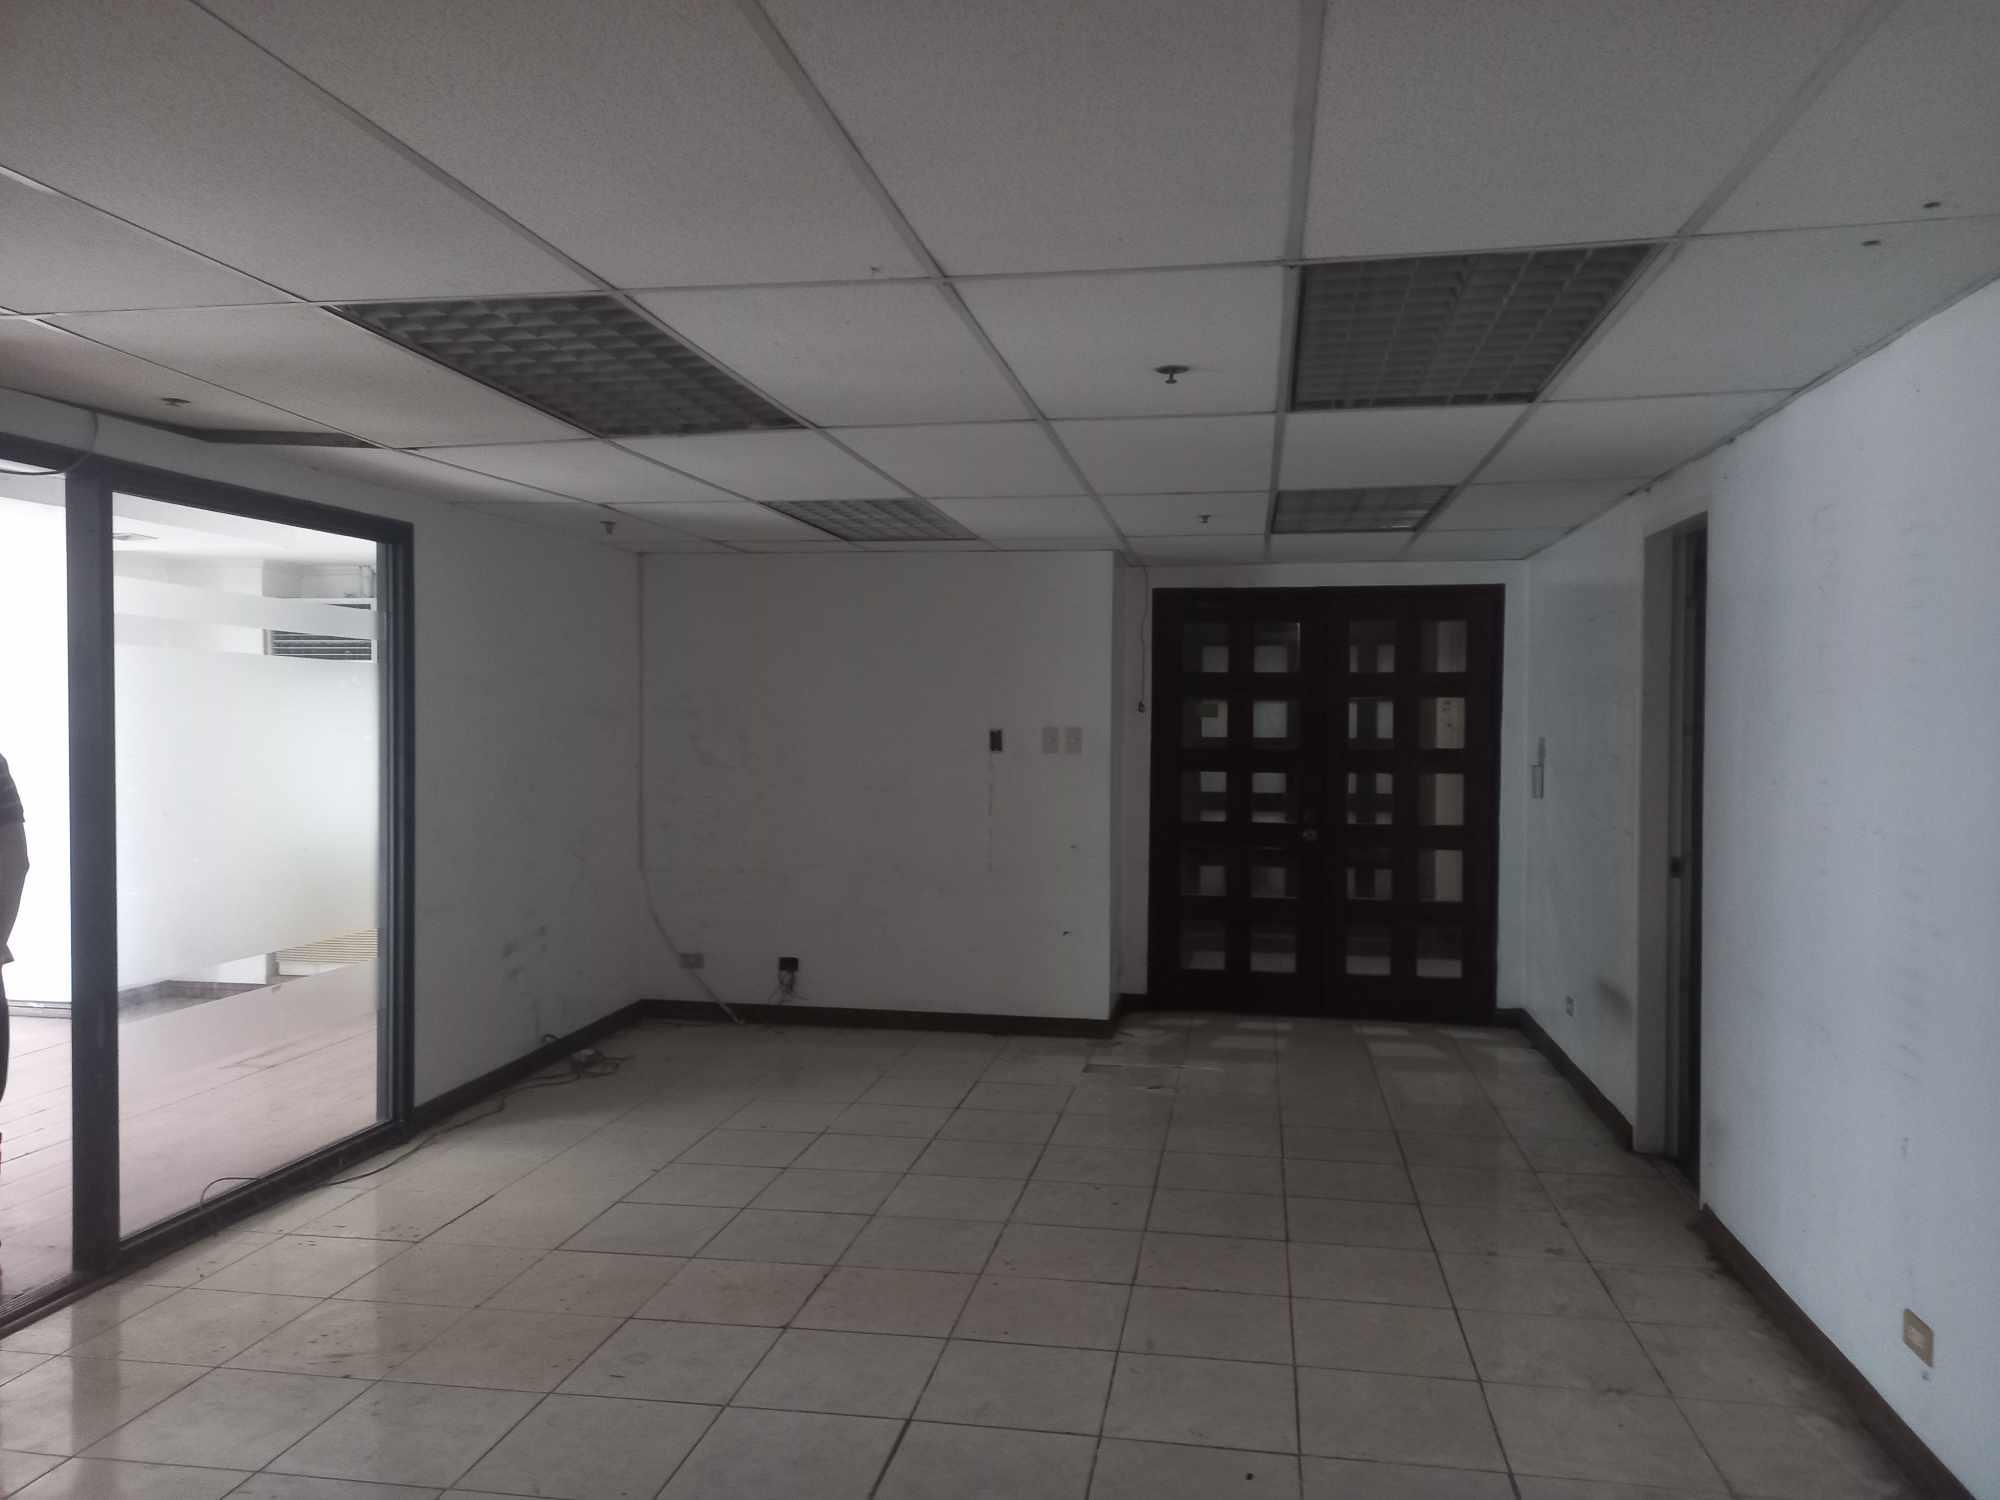 For Rent Lease Fitted Office Space Ortigas Pasig Manila 88sqm